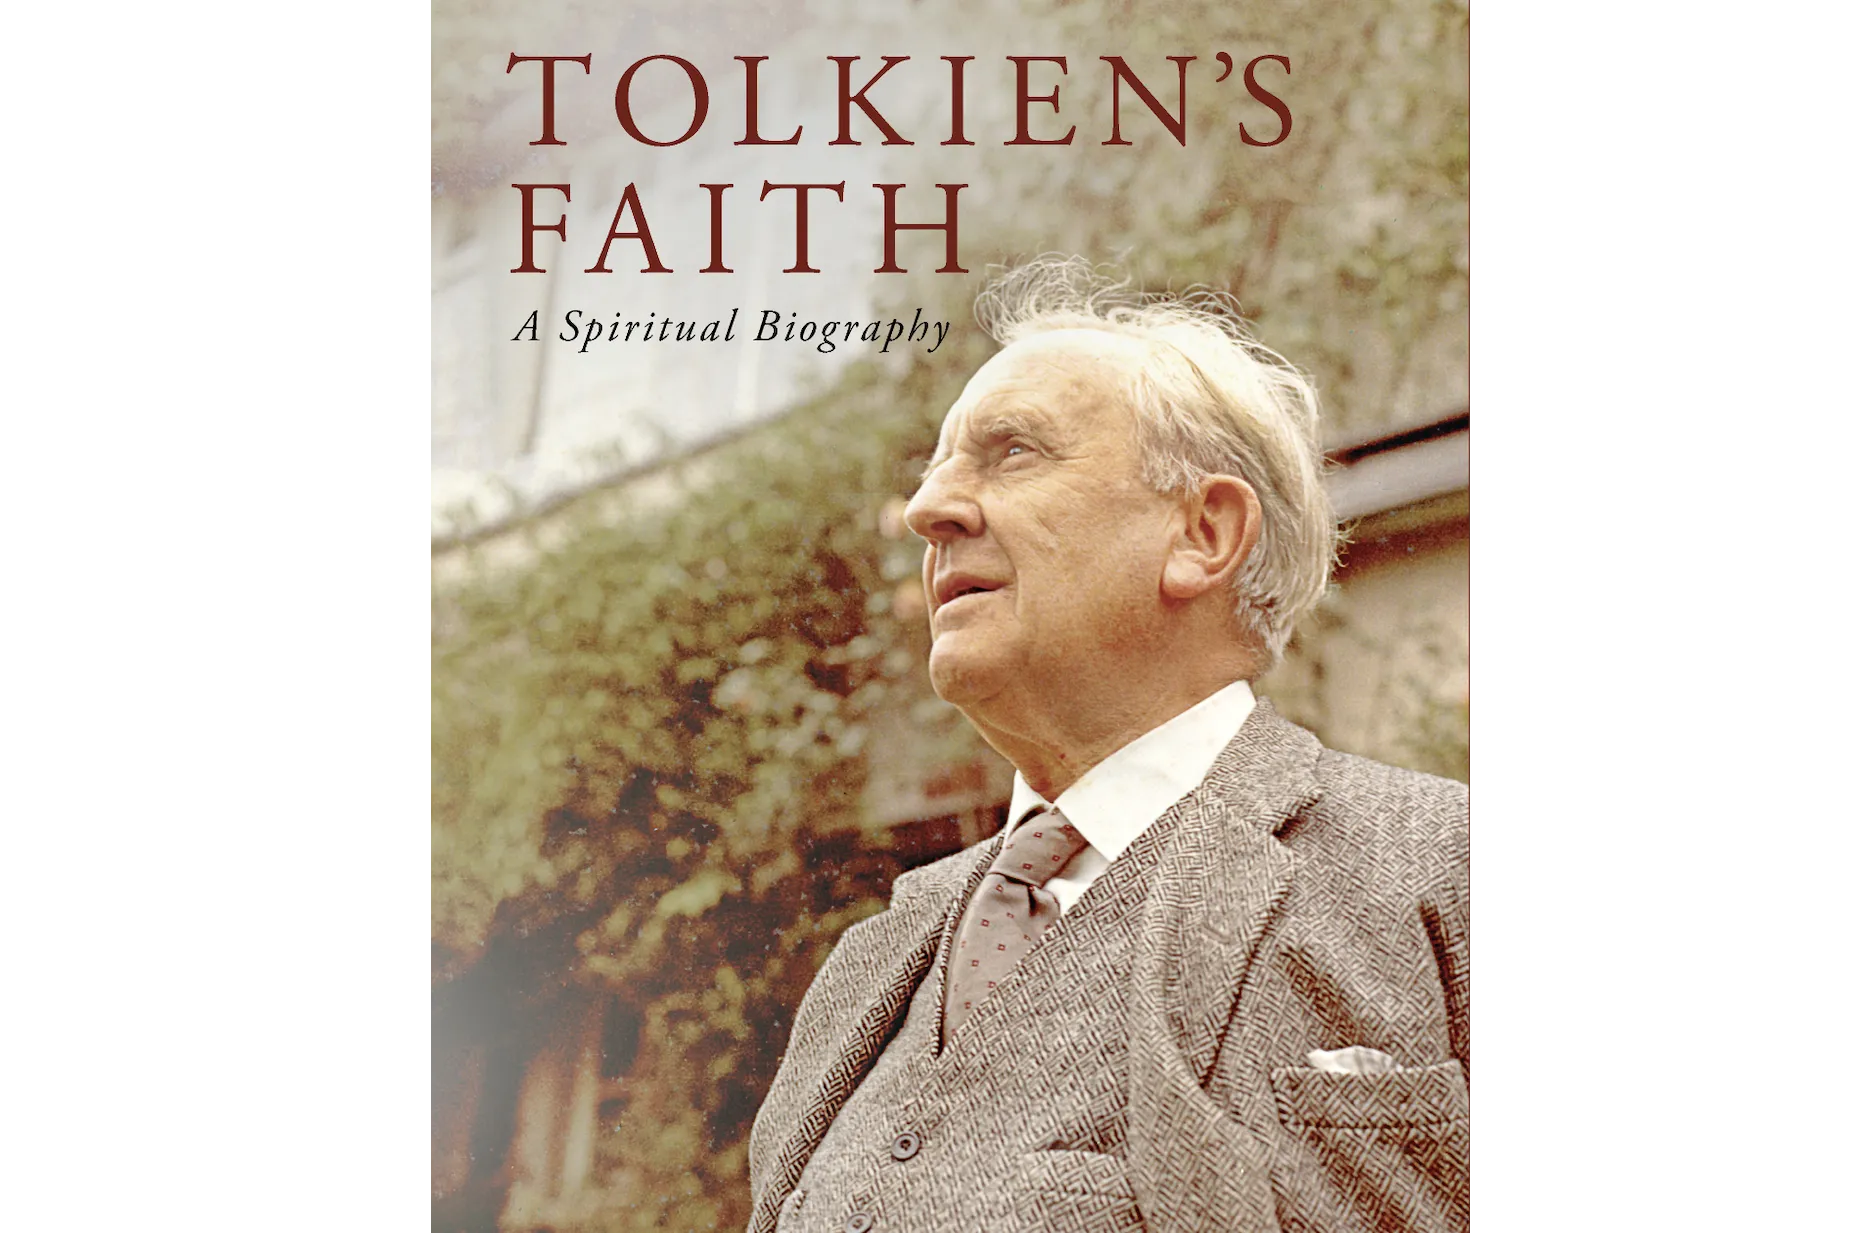 The cover of “Tolkien’s Faith: A Spiritual Biography” by Holly Ordway.?w=200&h=150